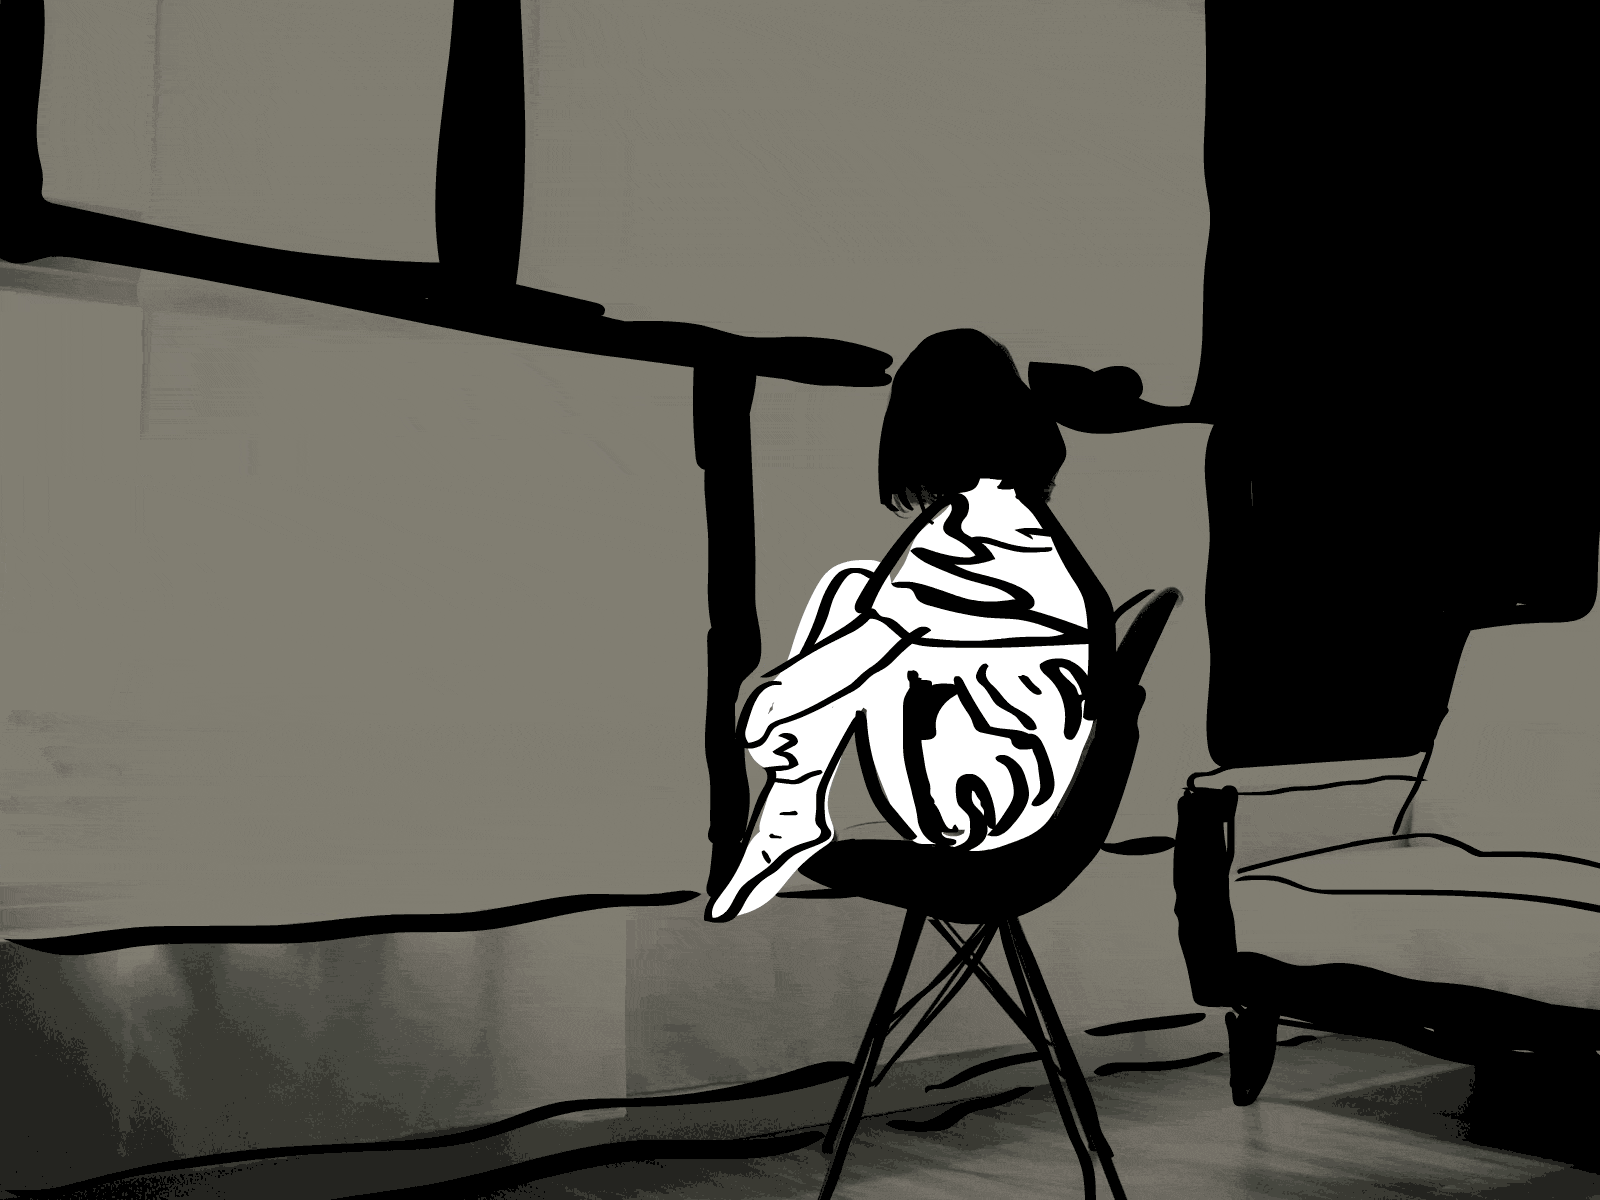 Trapped animate cc animated animation black and white depression design drawing gif girl home illustration scribble shaking sitting trapped window